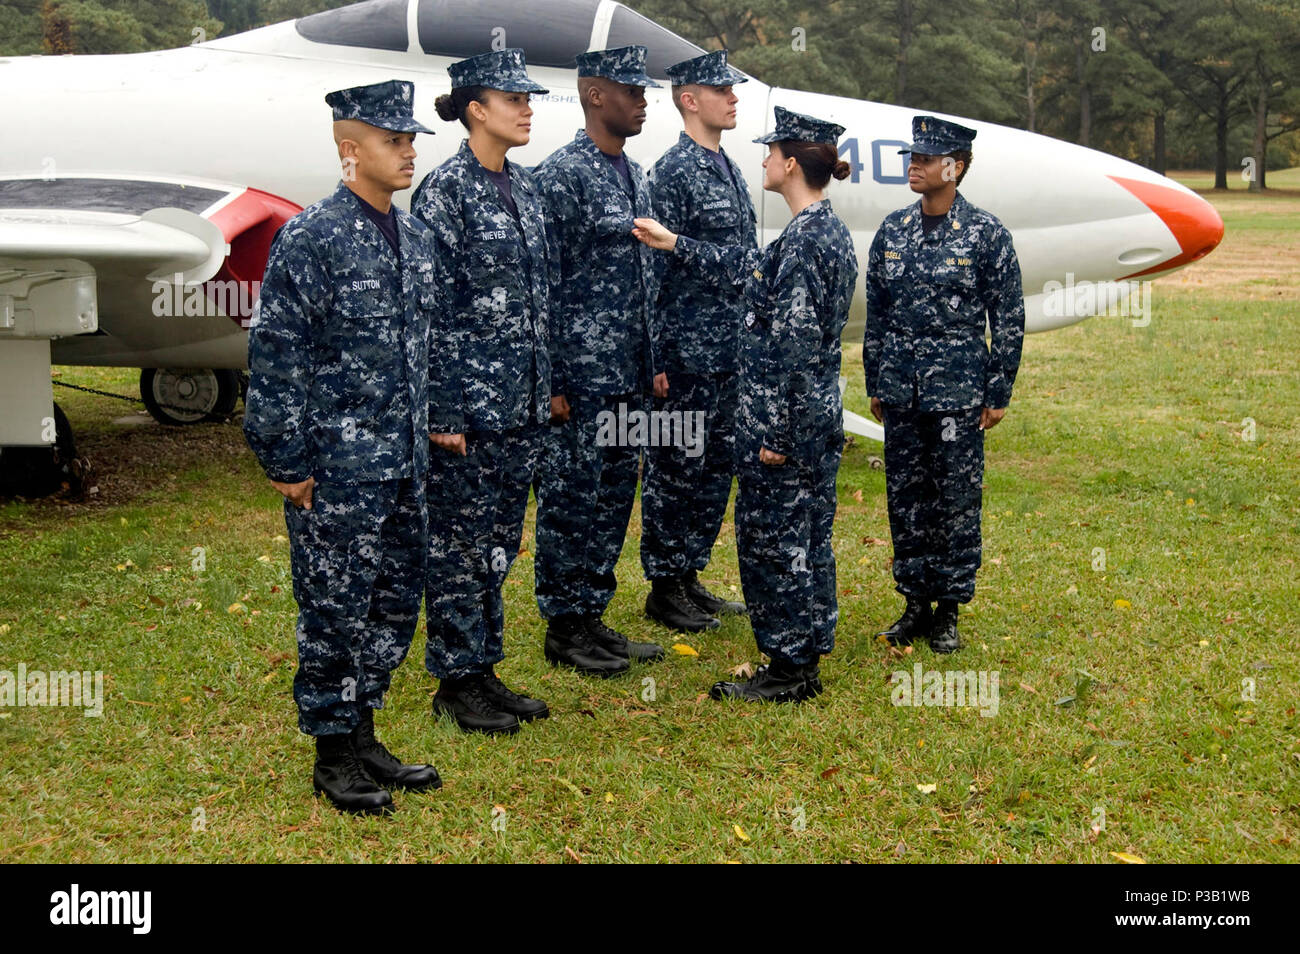 Va. (Nov. 7, 2008) Sailors wear the Navy working uniform (NWU) at Naval Air Station Oceana. The NWU is intended for year-round wear and will be the standard working uniform ashore by October 2010. The NWU will replace working utilities, tropical working uniforms, wash khakis, winter working blue, aviation working green, and non-tactical/environmental usage of camouflage utility uniforms. Unless otherwise prescribed by the regional commander, the NWU is authorized to be worn at all facilities on base. Stock Photo